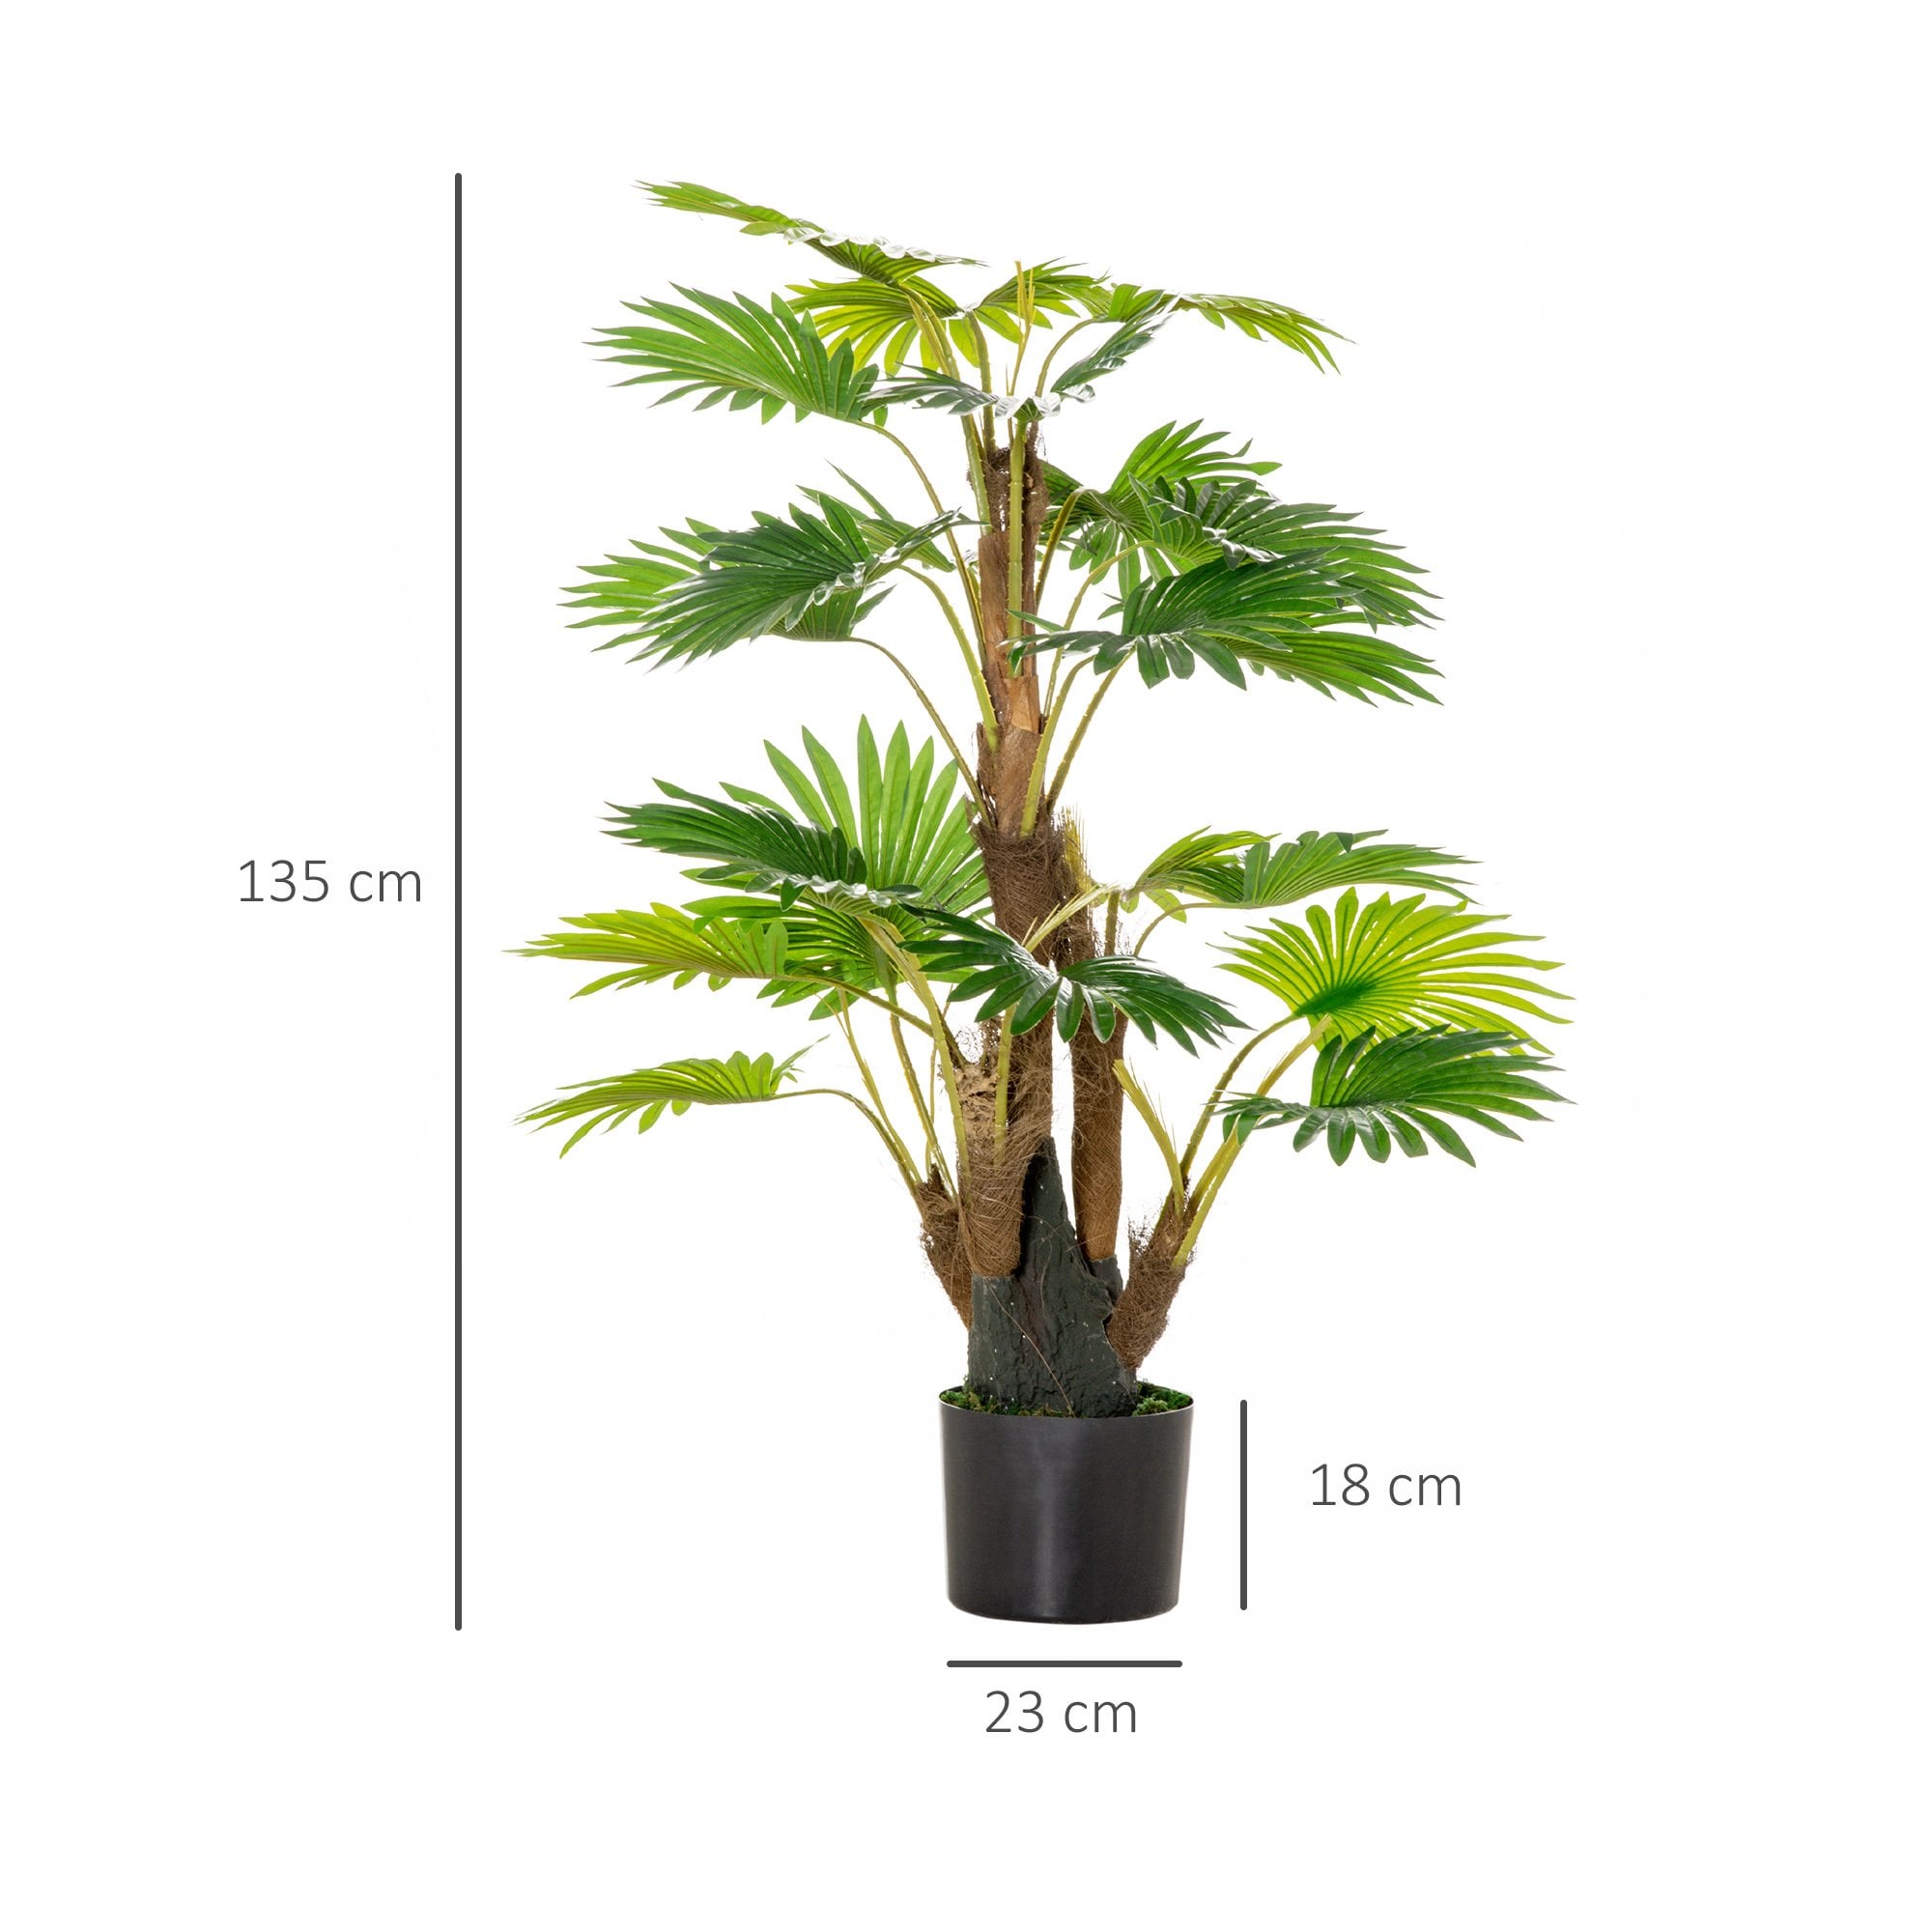 Artificial Tropical Palm Tree Fake Decorative Plant in Nursery Pot for Indoor Outdoor Decor - CHRISTMAS  | TJ Hughes